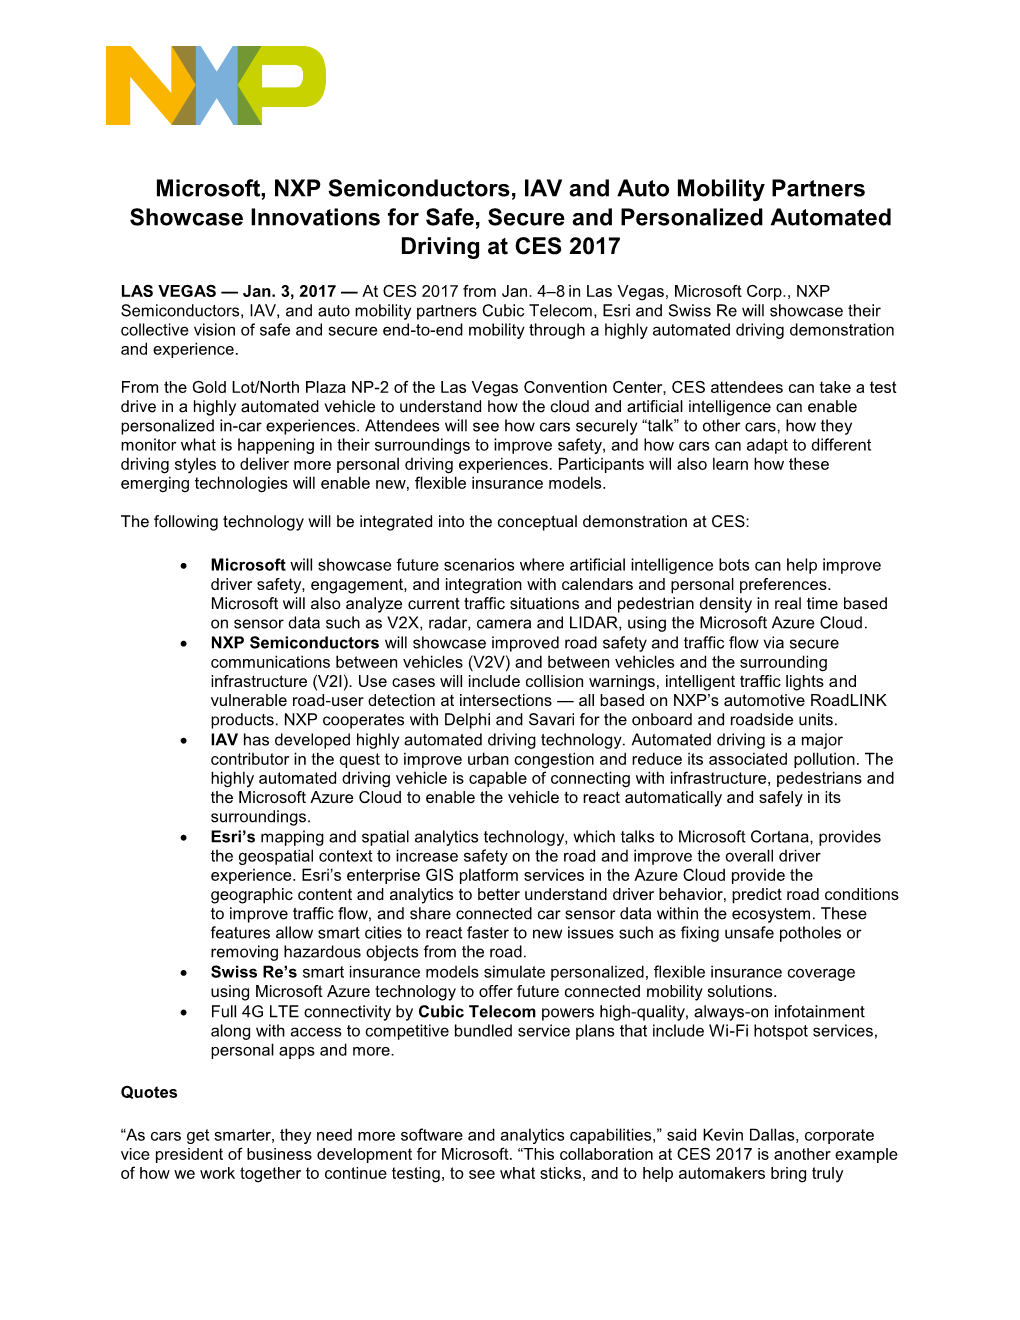 Microsoft, NXP Semiconductors, IAV and Auto Mobility Partners Showcase Innovations for Safe, Secure and Personalized Automated Driving at CES 2017